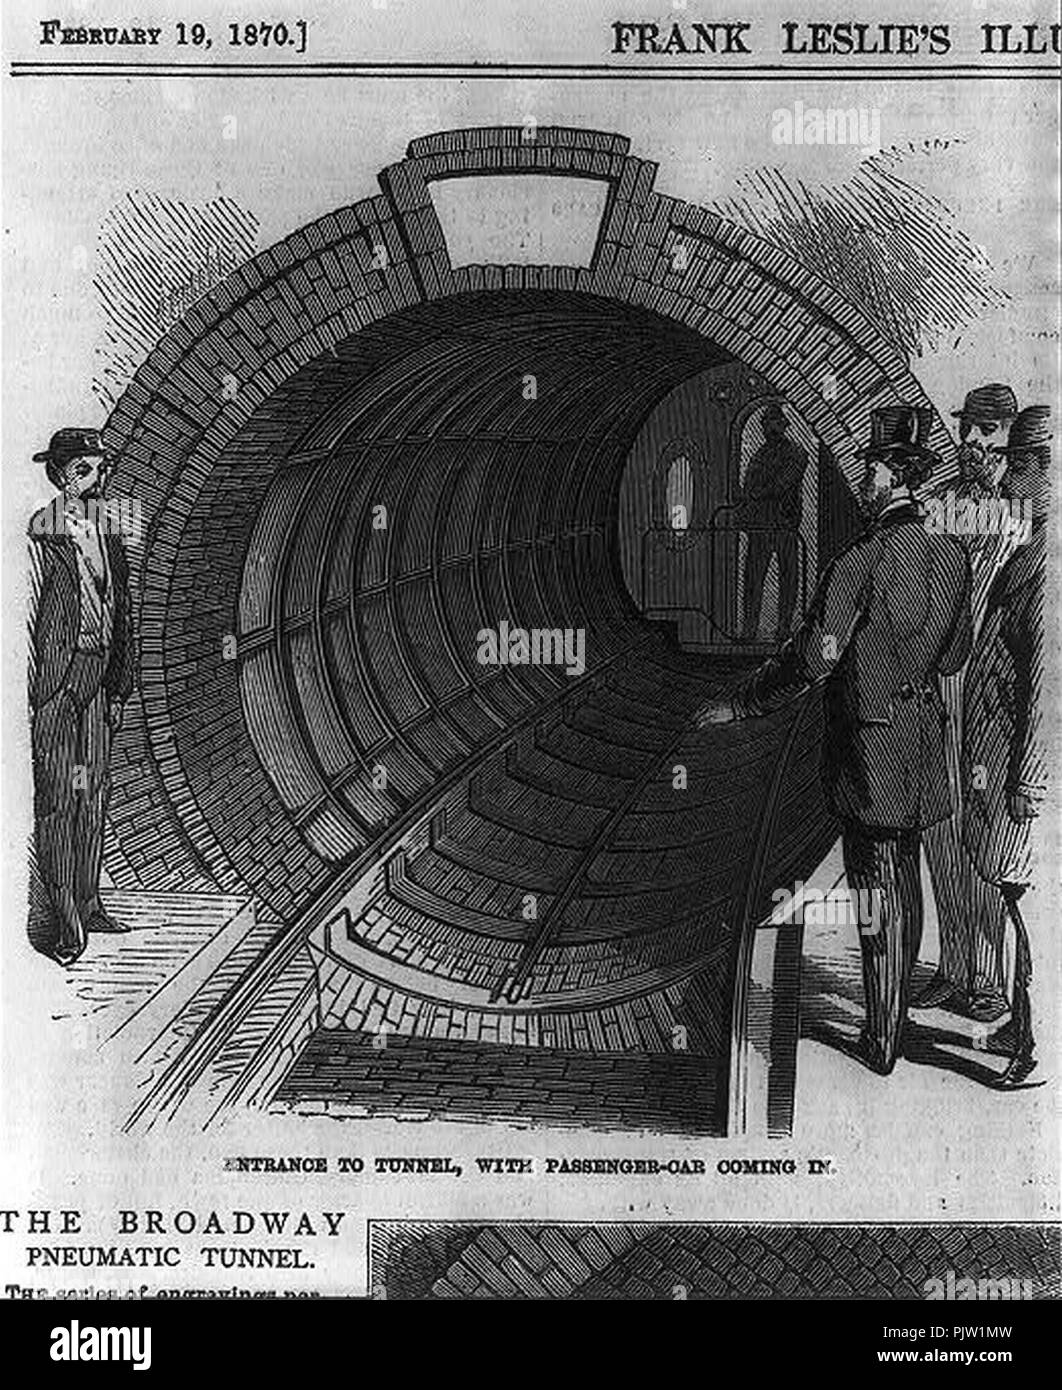 Beach's pneumatic subway, Broadway, N.Y.C.)- 73659 - Entrance to tunnel, with passenger car coming in; 73660 - Interior of the passenger car; 73661 - Advancing the shield - interior of the Stock Photo